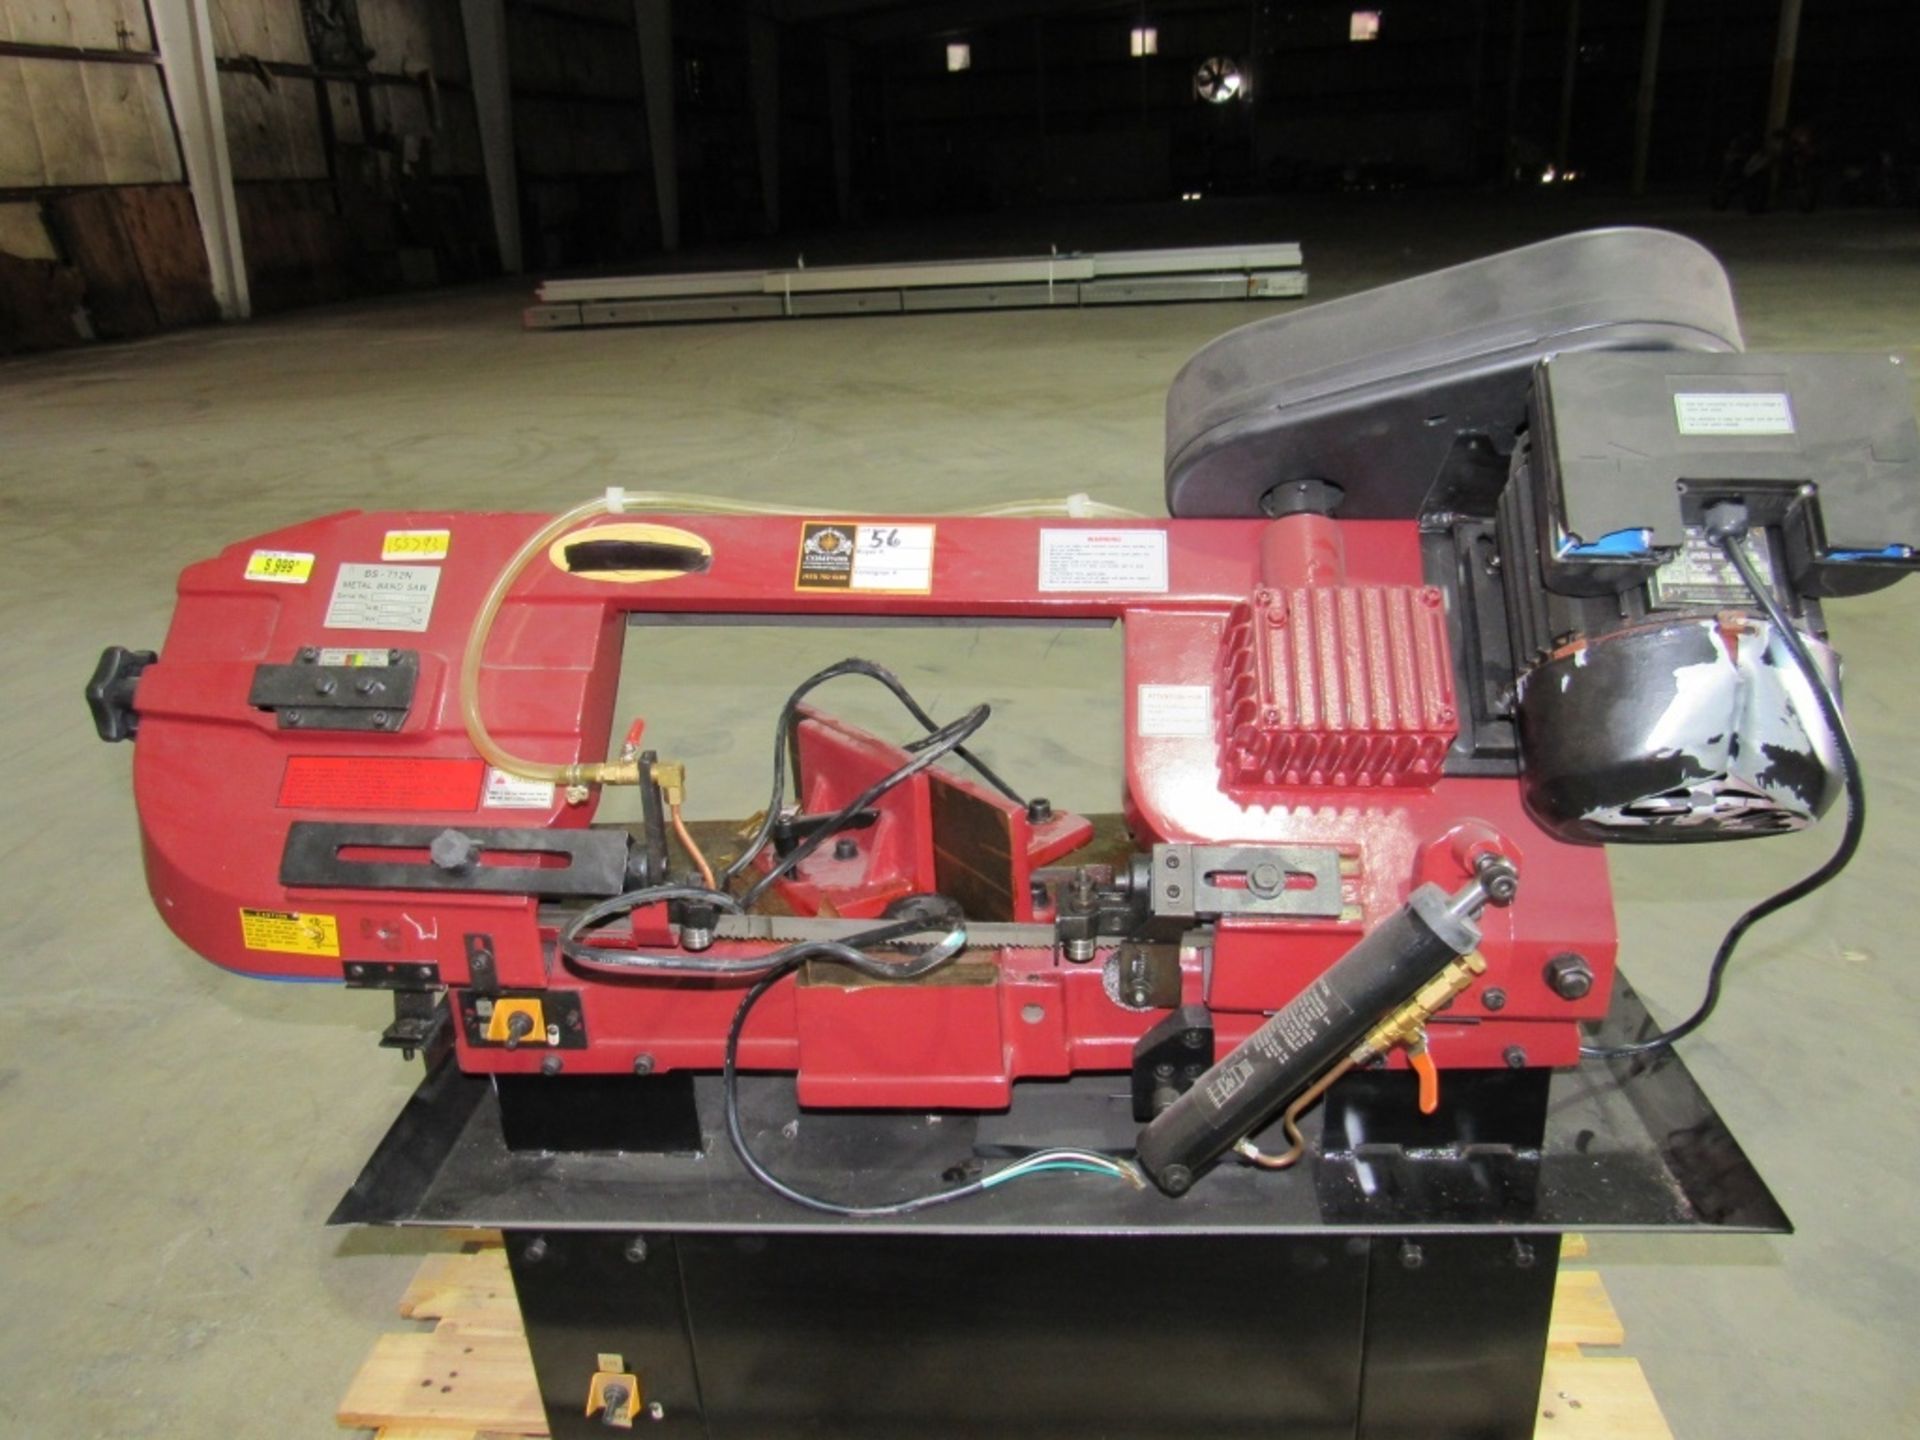 Metal Band Saw- Model - BS-712N 1.1 KW 115/230 Volts 1 Phase 60 Hz Overall Dimensions - 4' x 16" x - Image 4 of 14